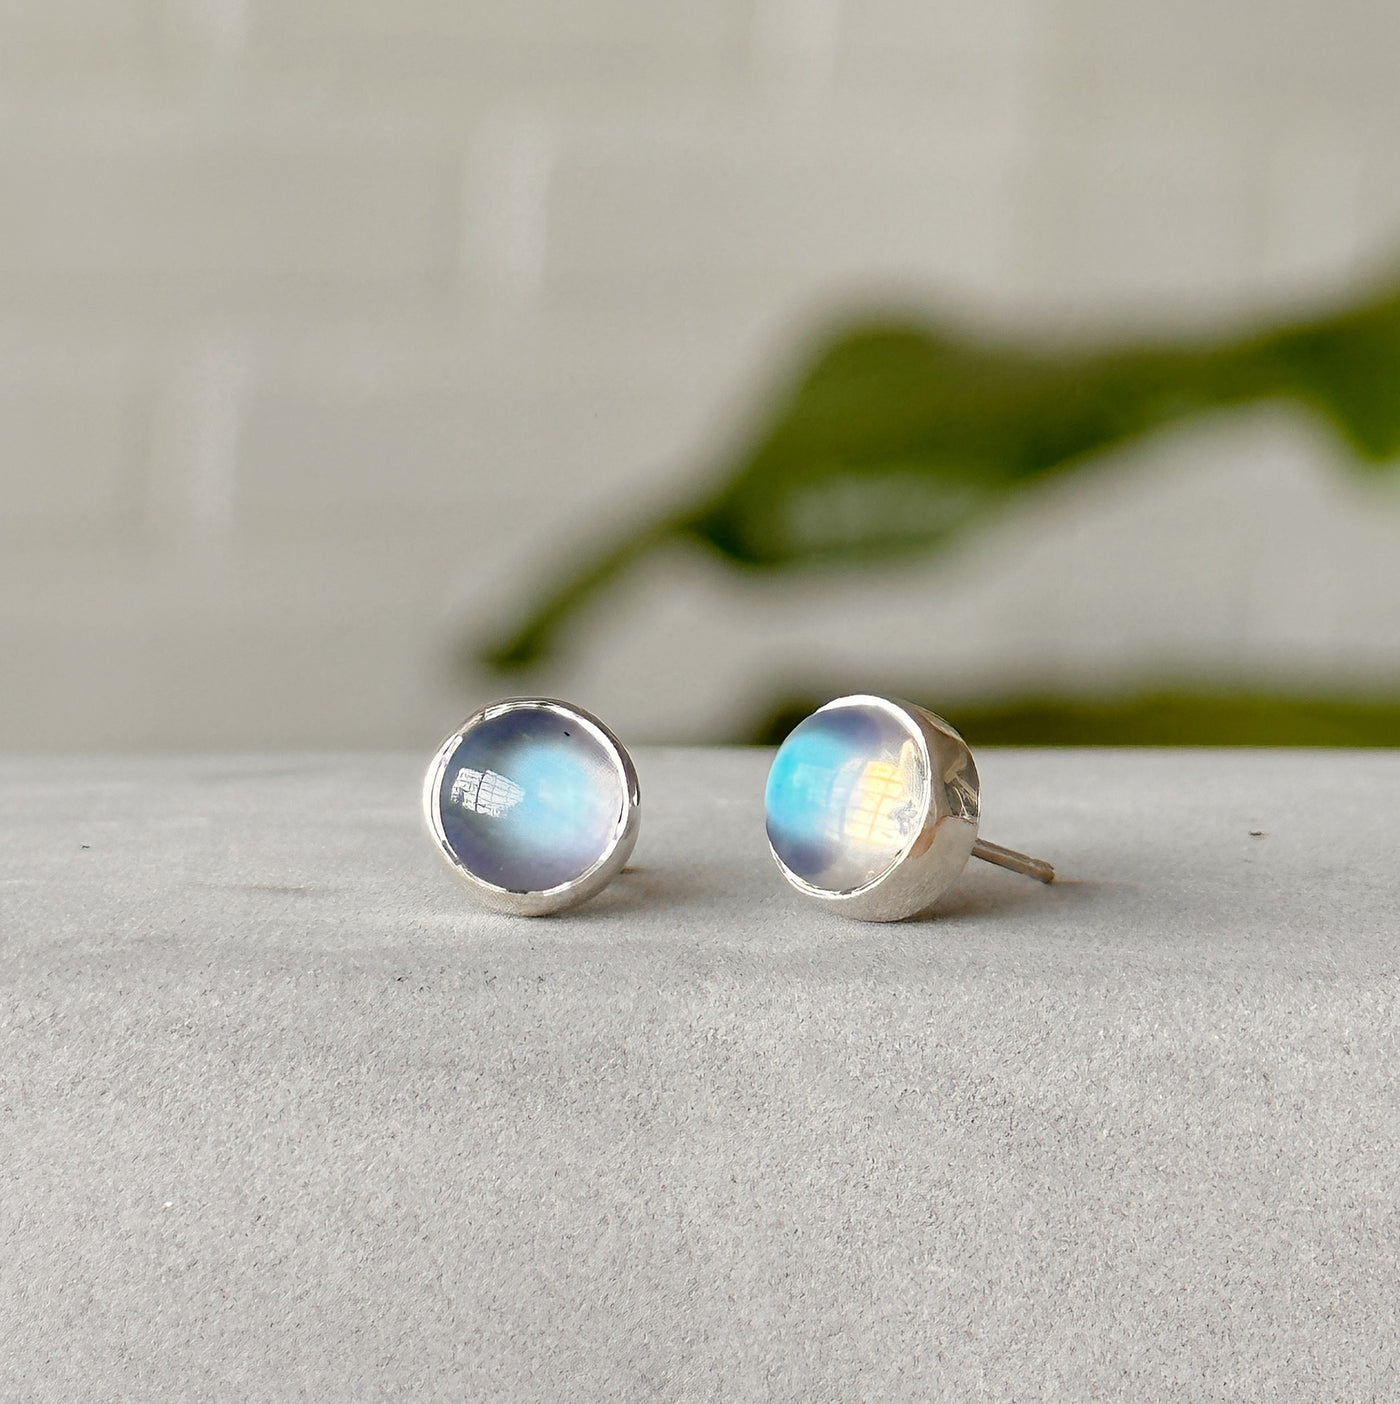 Moonstone stud earrings with silver bezel positioned sideways in front of white wall